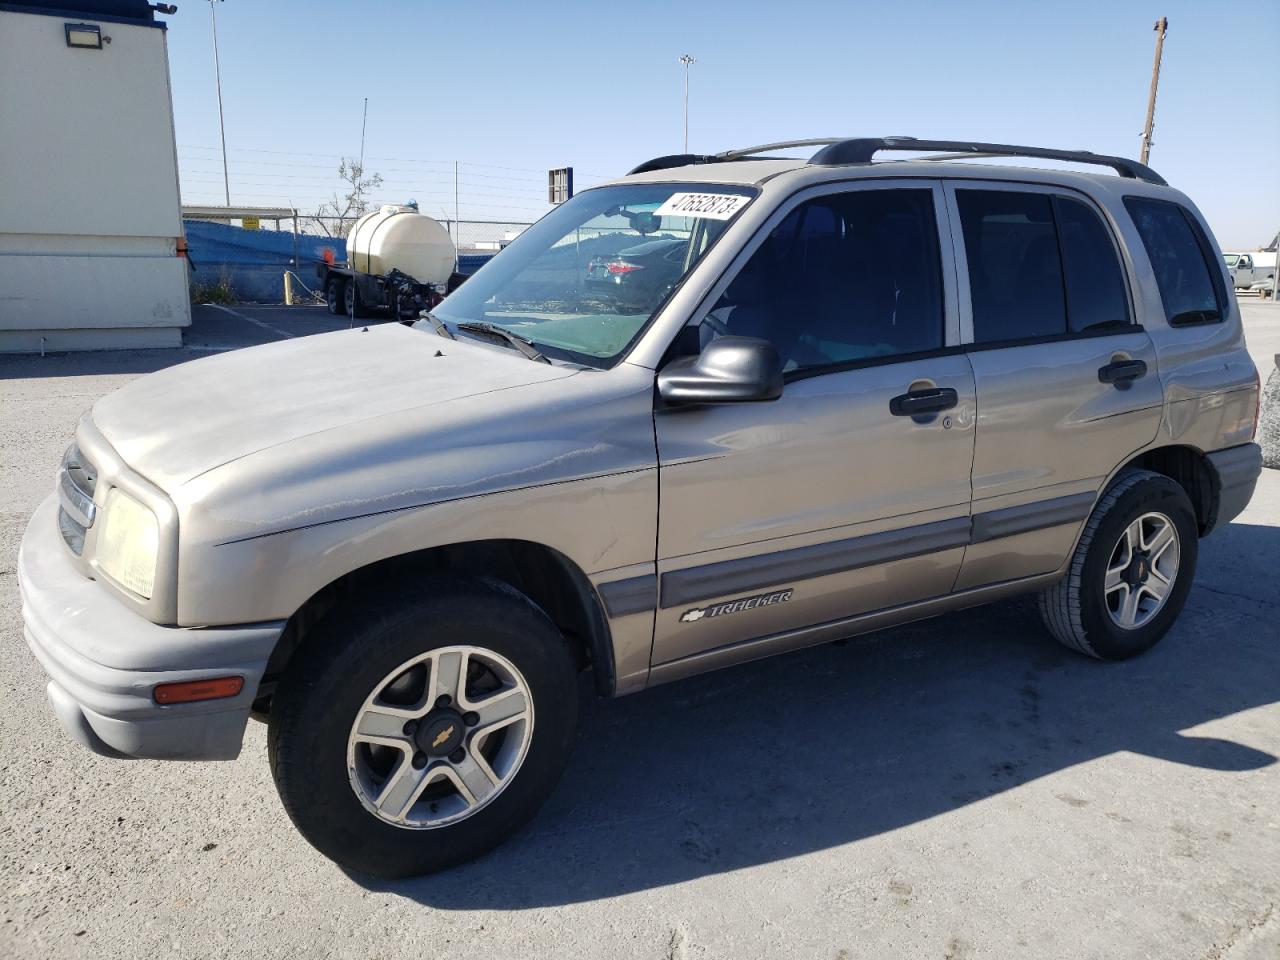 2002 Chevrolet Tracker for sale at Copart Anthony, TX Lot #47652*** |  SalvageReseller.com